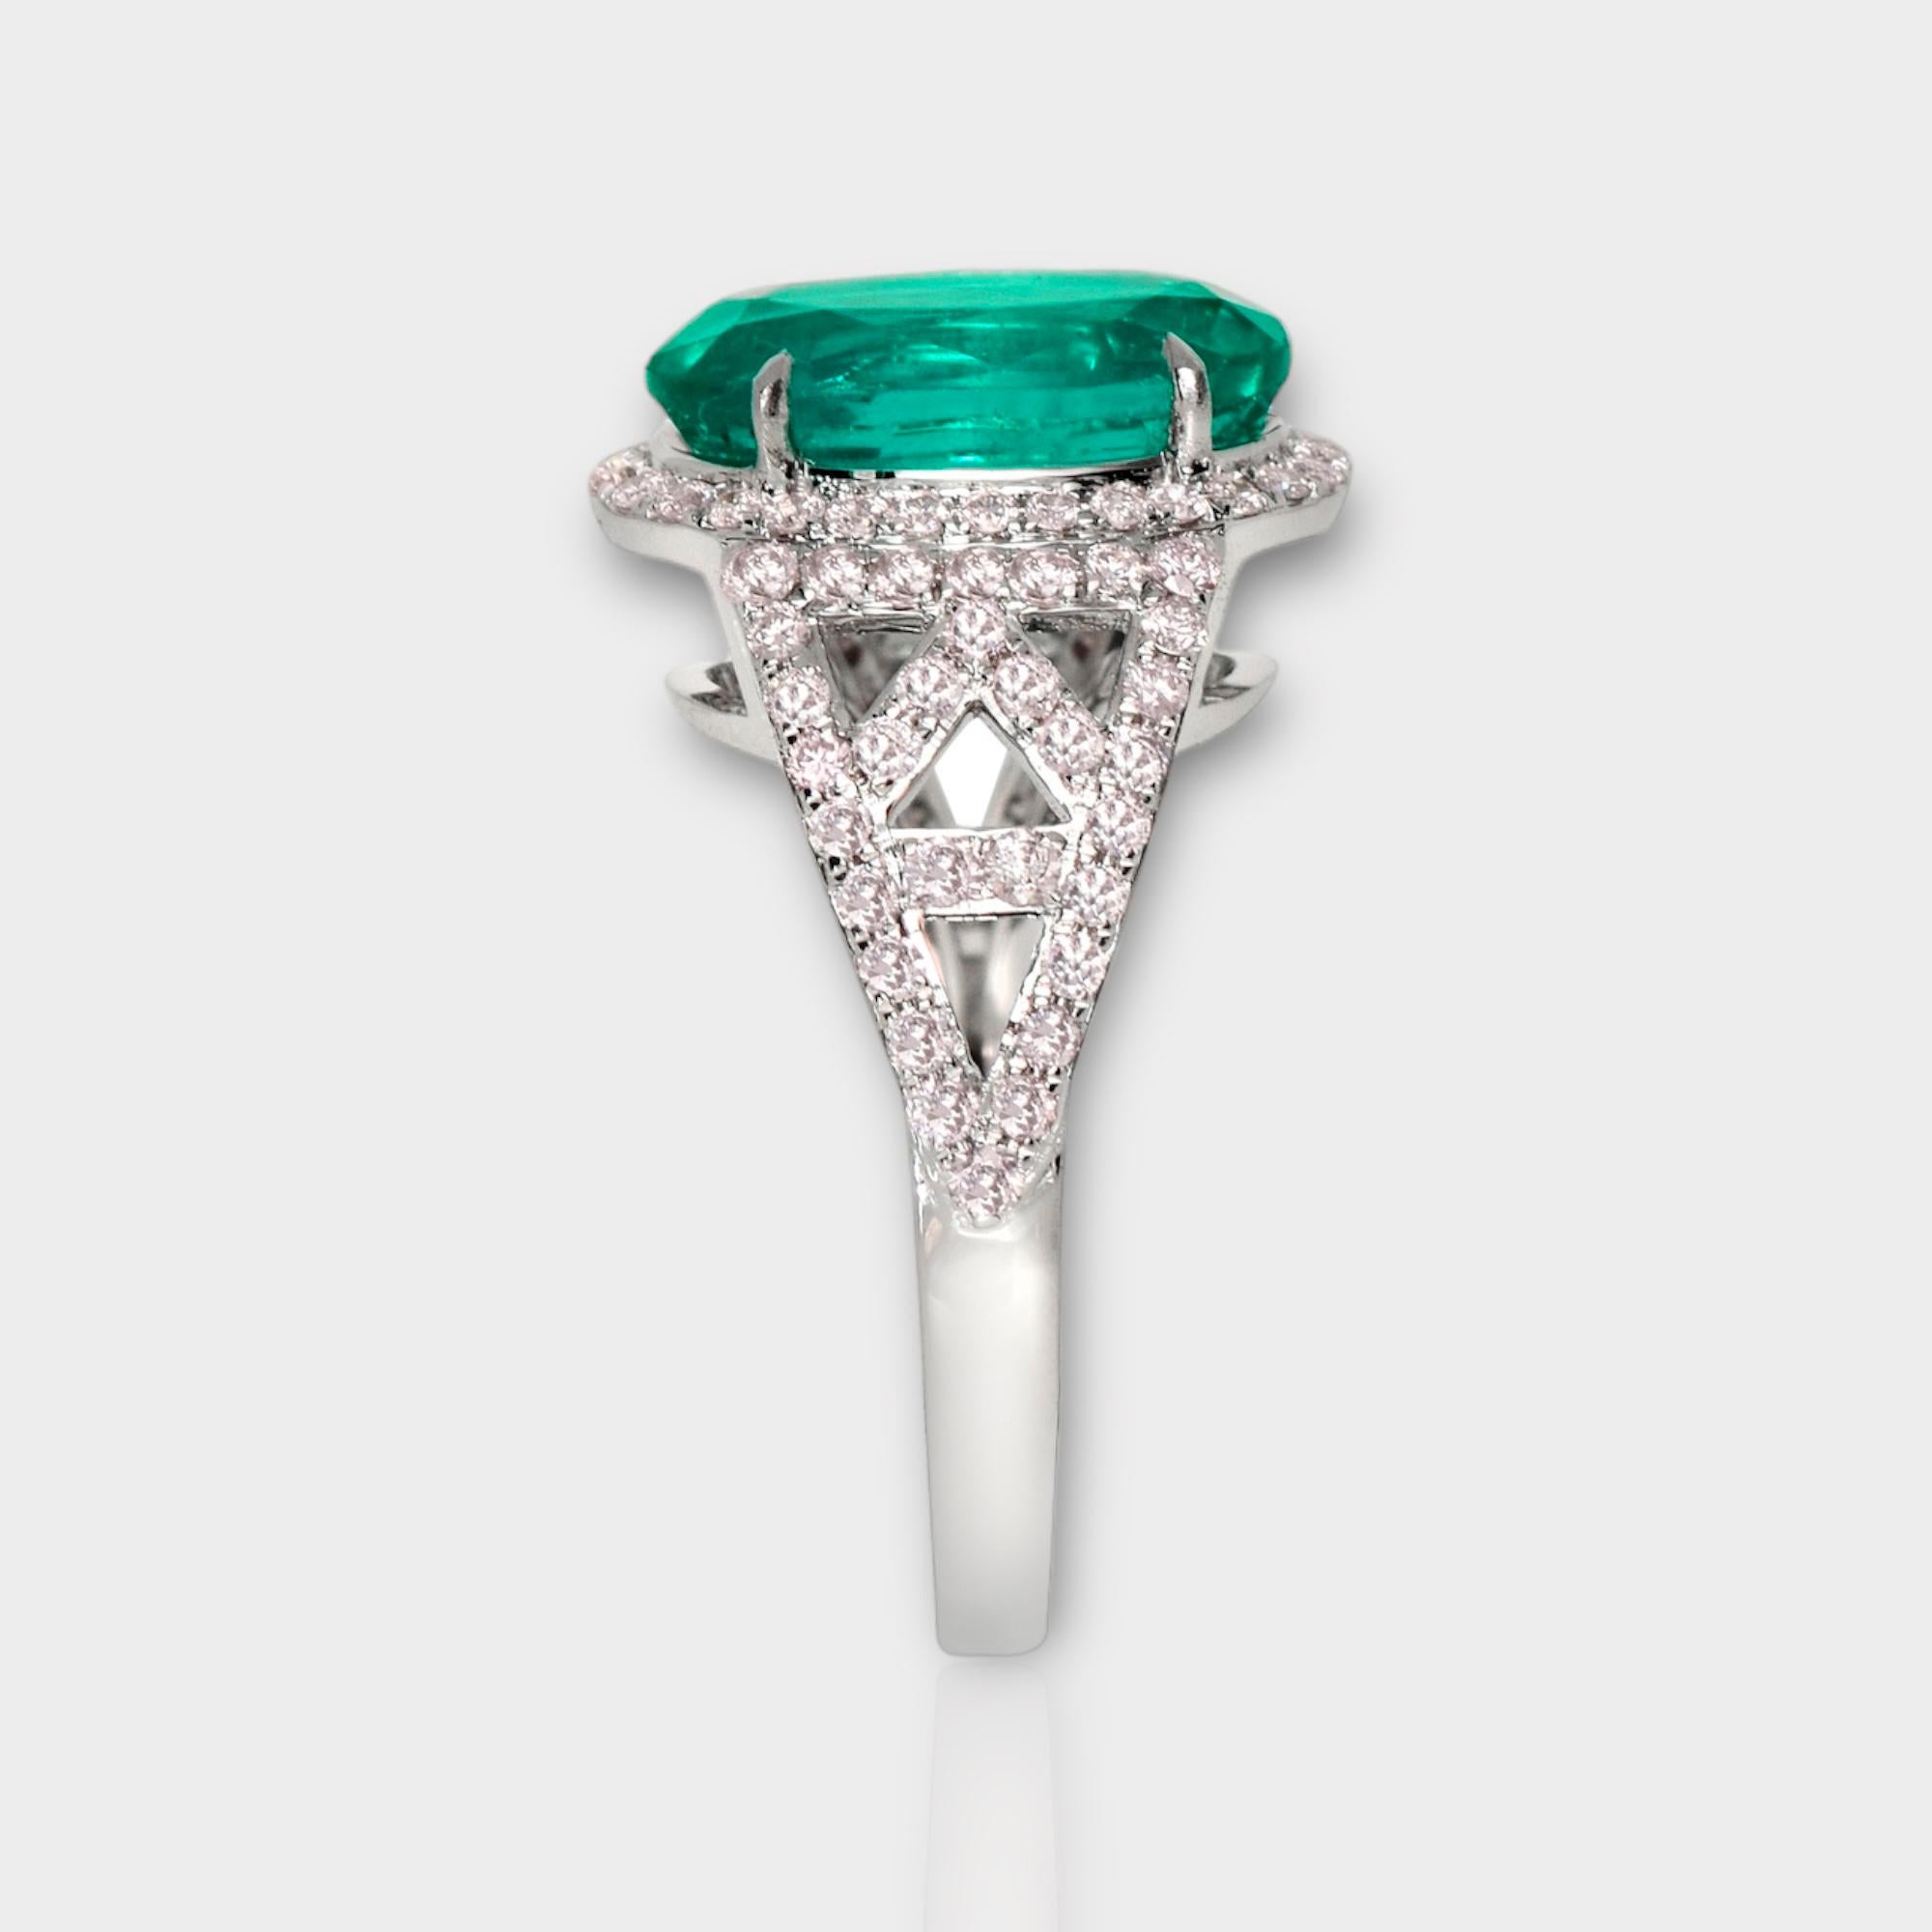 IGI 18k 2.96 Ct Emerald&Pink Diamonds Antique Art Deco Style Engagement Ring In New Condition For Sale In Kaohsiung City, TW